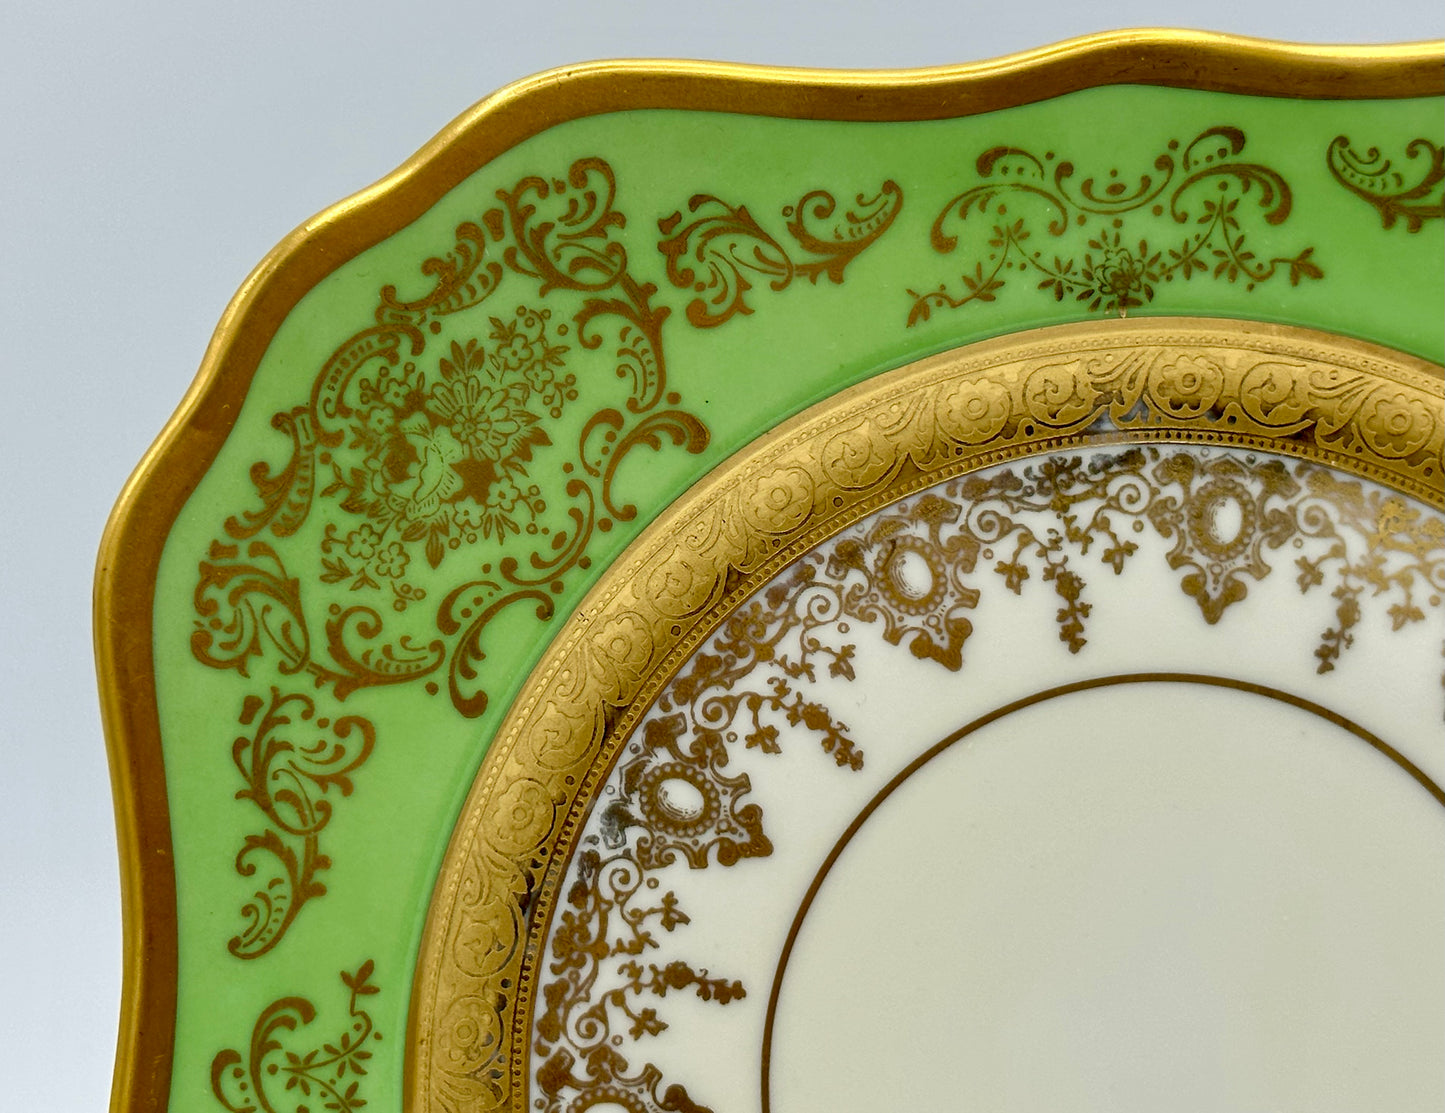 Set of 6 Rare Green and Gold Lunch Plates I Bring a Touch of Royal Bavarian History to Your Table I Art Nouveau Period - DharBazaar